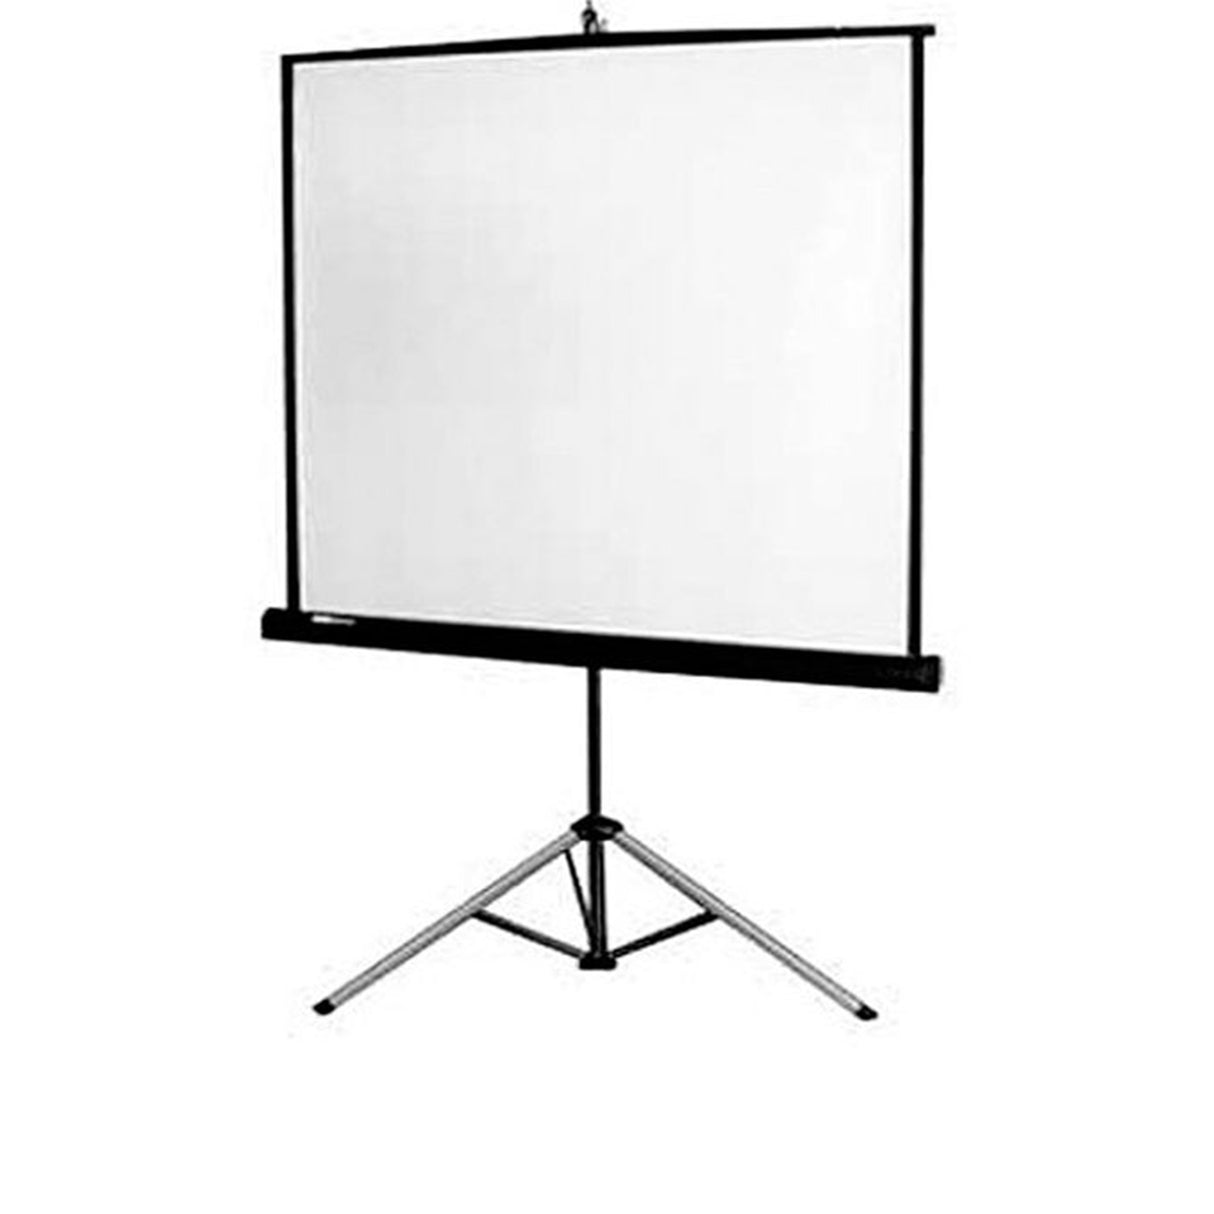 Prime Ecoline 120 Inches (4:3 Ratio)- Tripod Projection Screen Full HD & 3D Ready